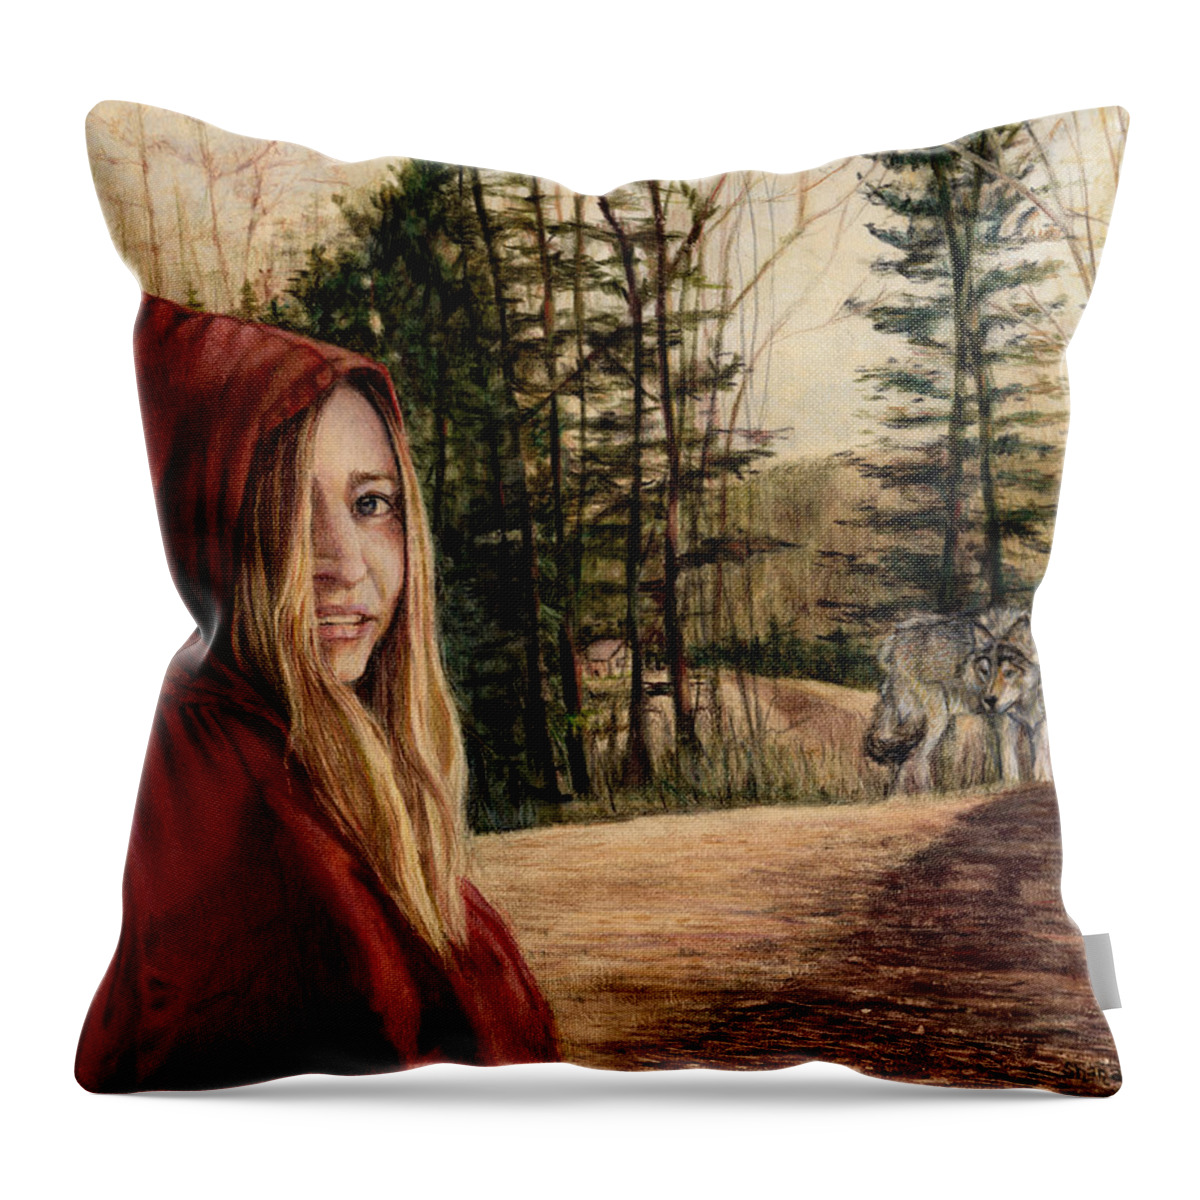 Little Red Riding Hood Throw Pillow featuring the drawing To Grandmother's House We Go by Shana Rowe Jackson